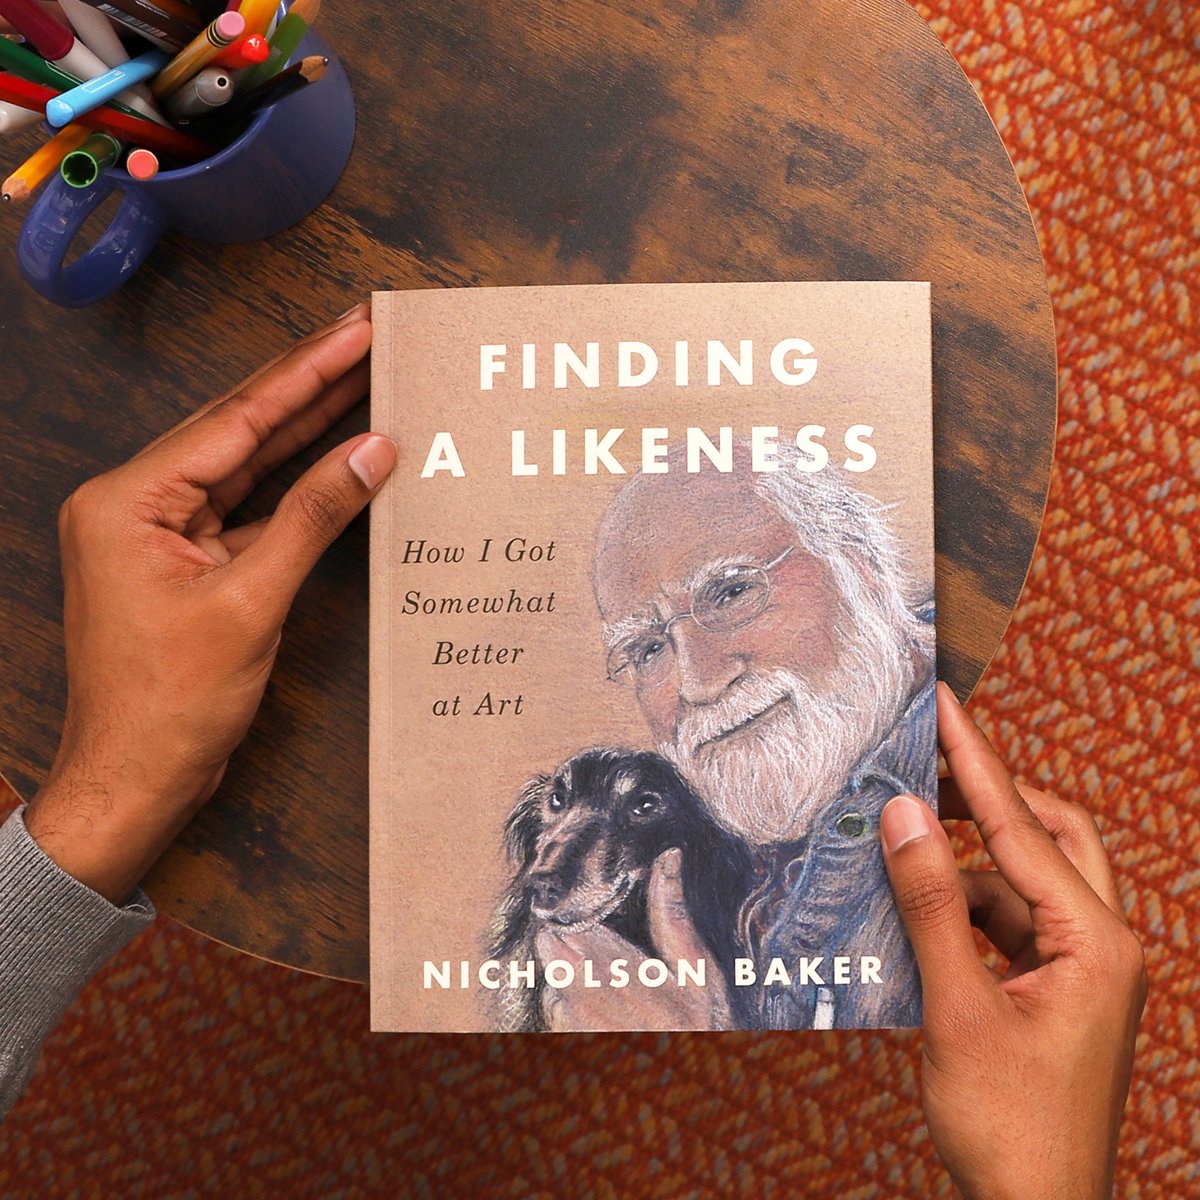 Happy publication day to @nicholsonbaker8's newest accomplishment, Finding a Likeness! In this inspiring photo collection, Baker documents his progress of learning to paint for the first time, encouraging people to find art all around them. penguinrandomhouse.com/books/635820/f…